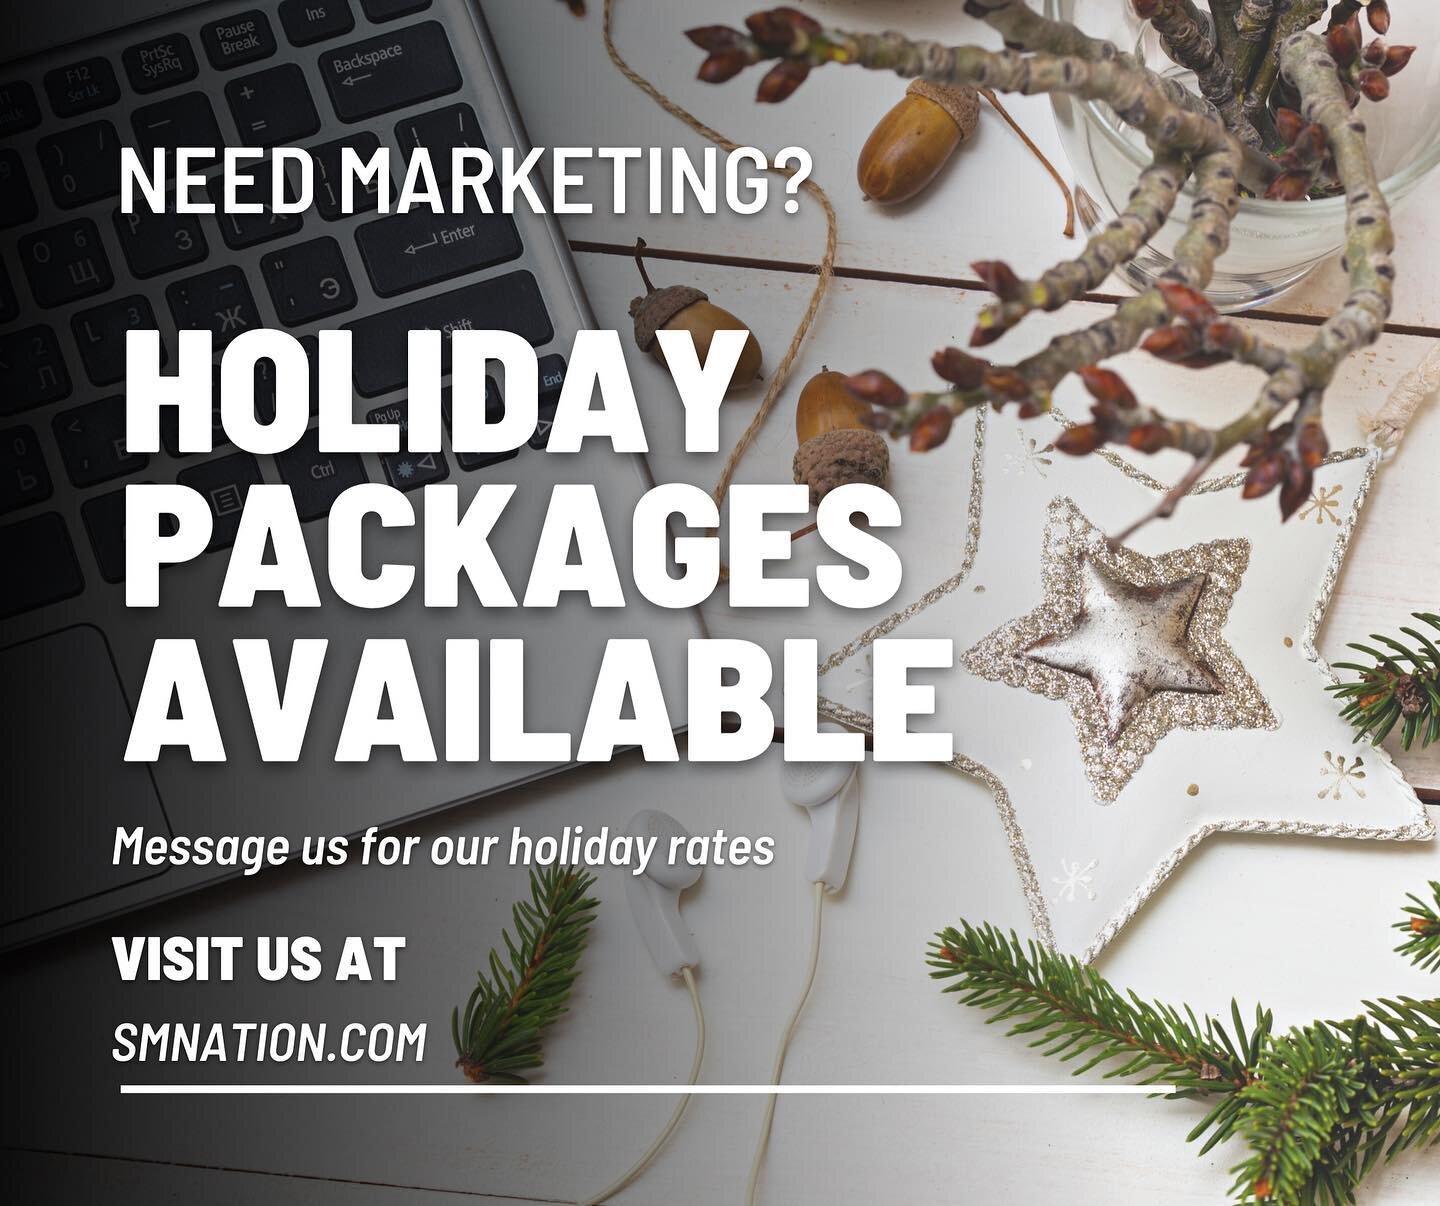 Is your business ready for the holidays? We can help get your business ready for your advertisement and update your websites #smnation #bakersfieldca #portervilleca #delanoca #tulareca #visaliaca